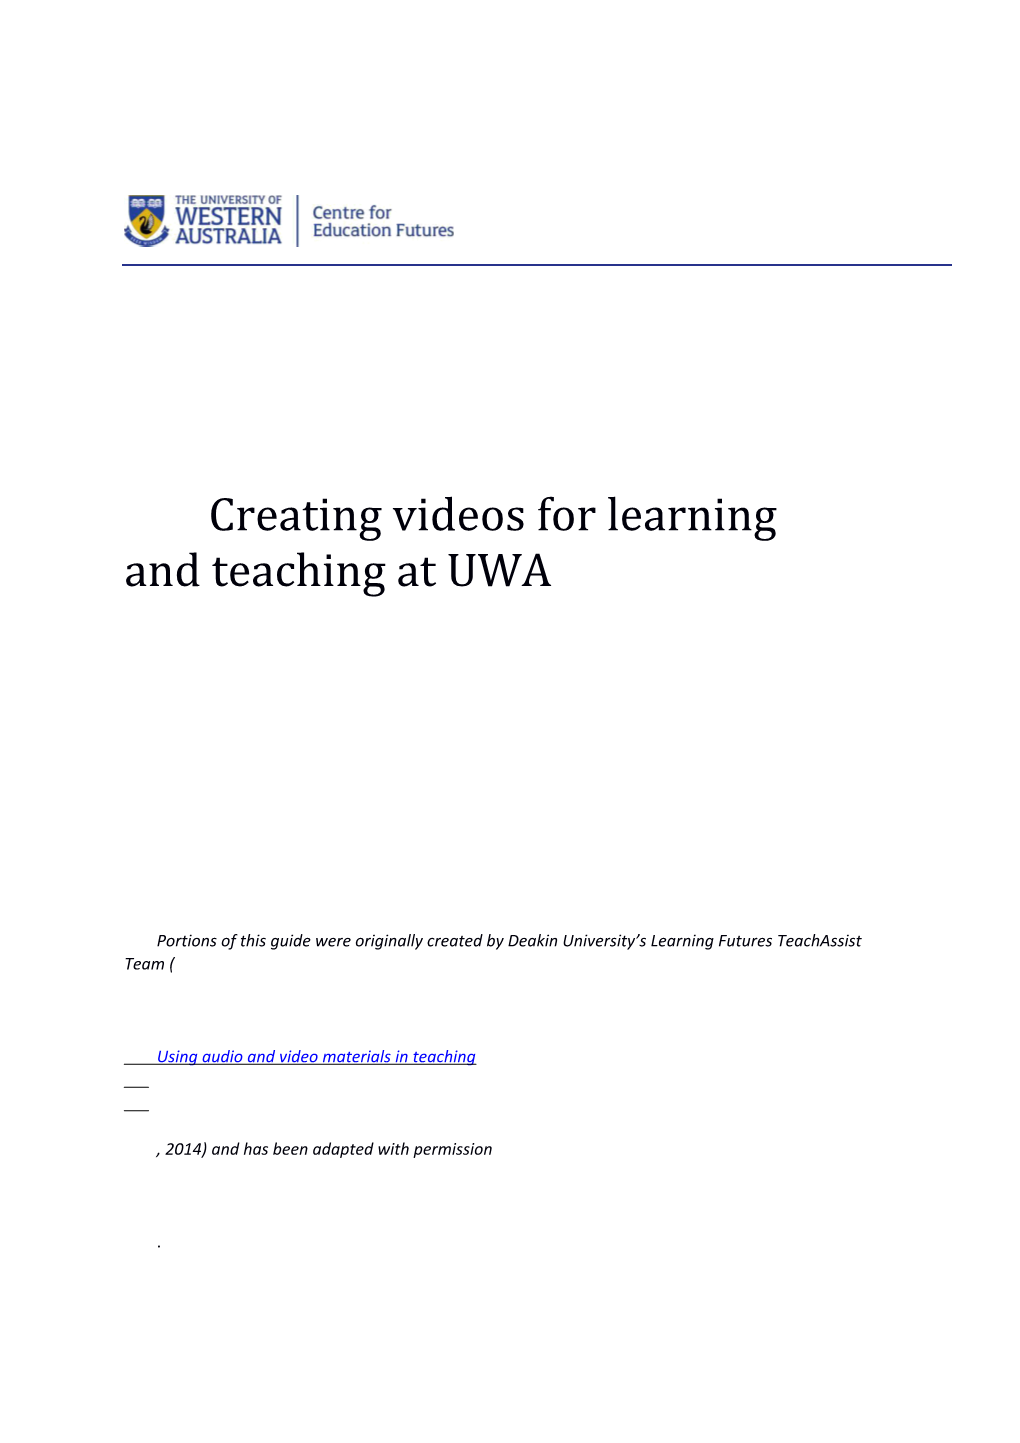 Creating Videos for Learning and Teaching at UWA